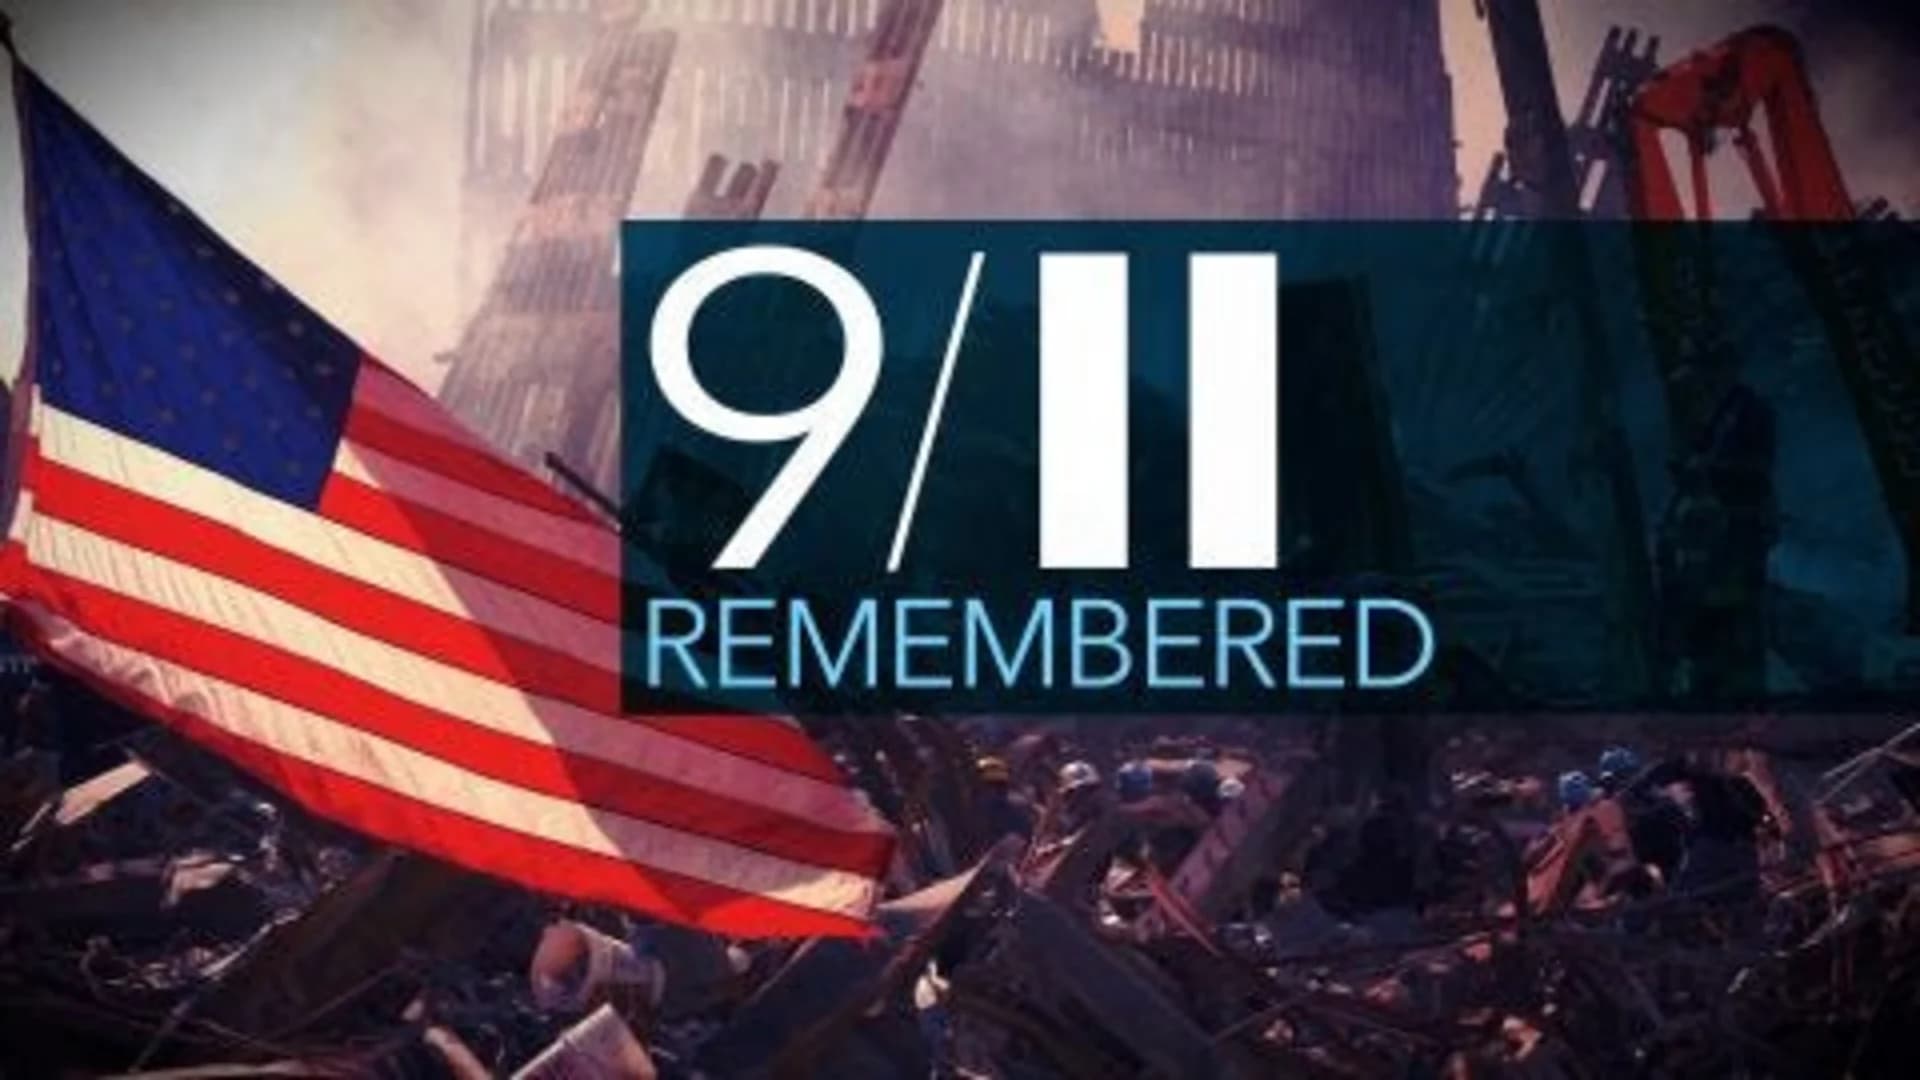 18 years later, America vows to 'never forget' 9/11